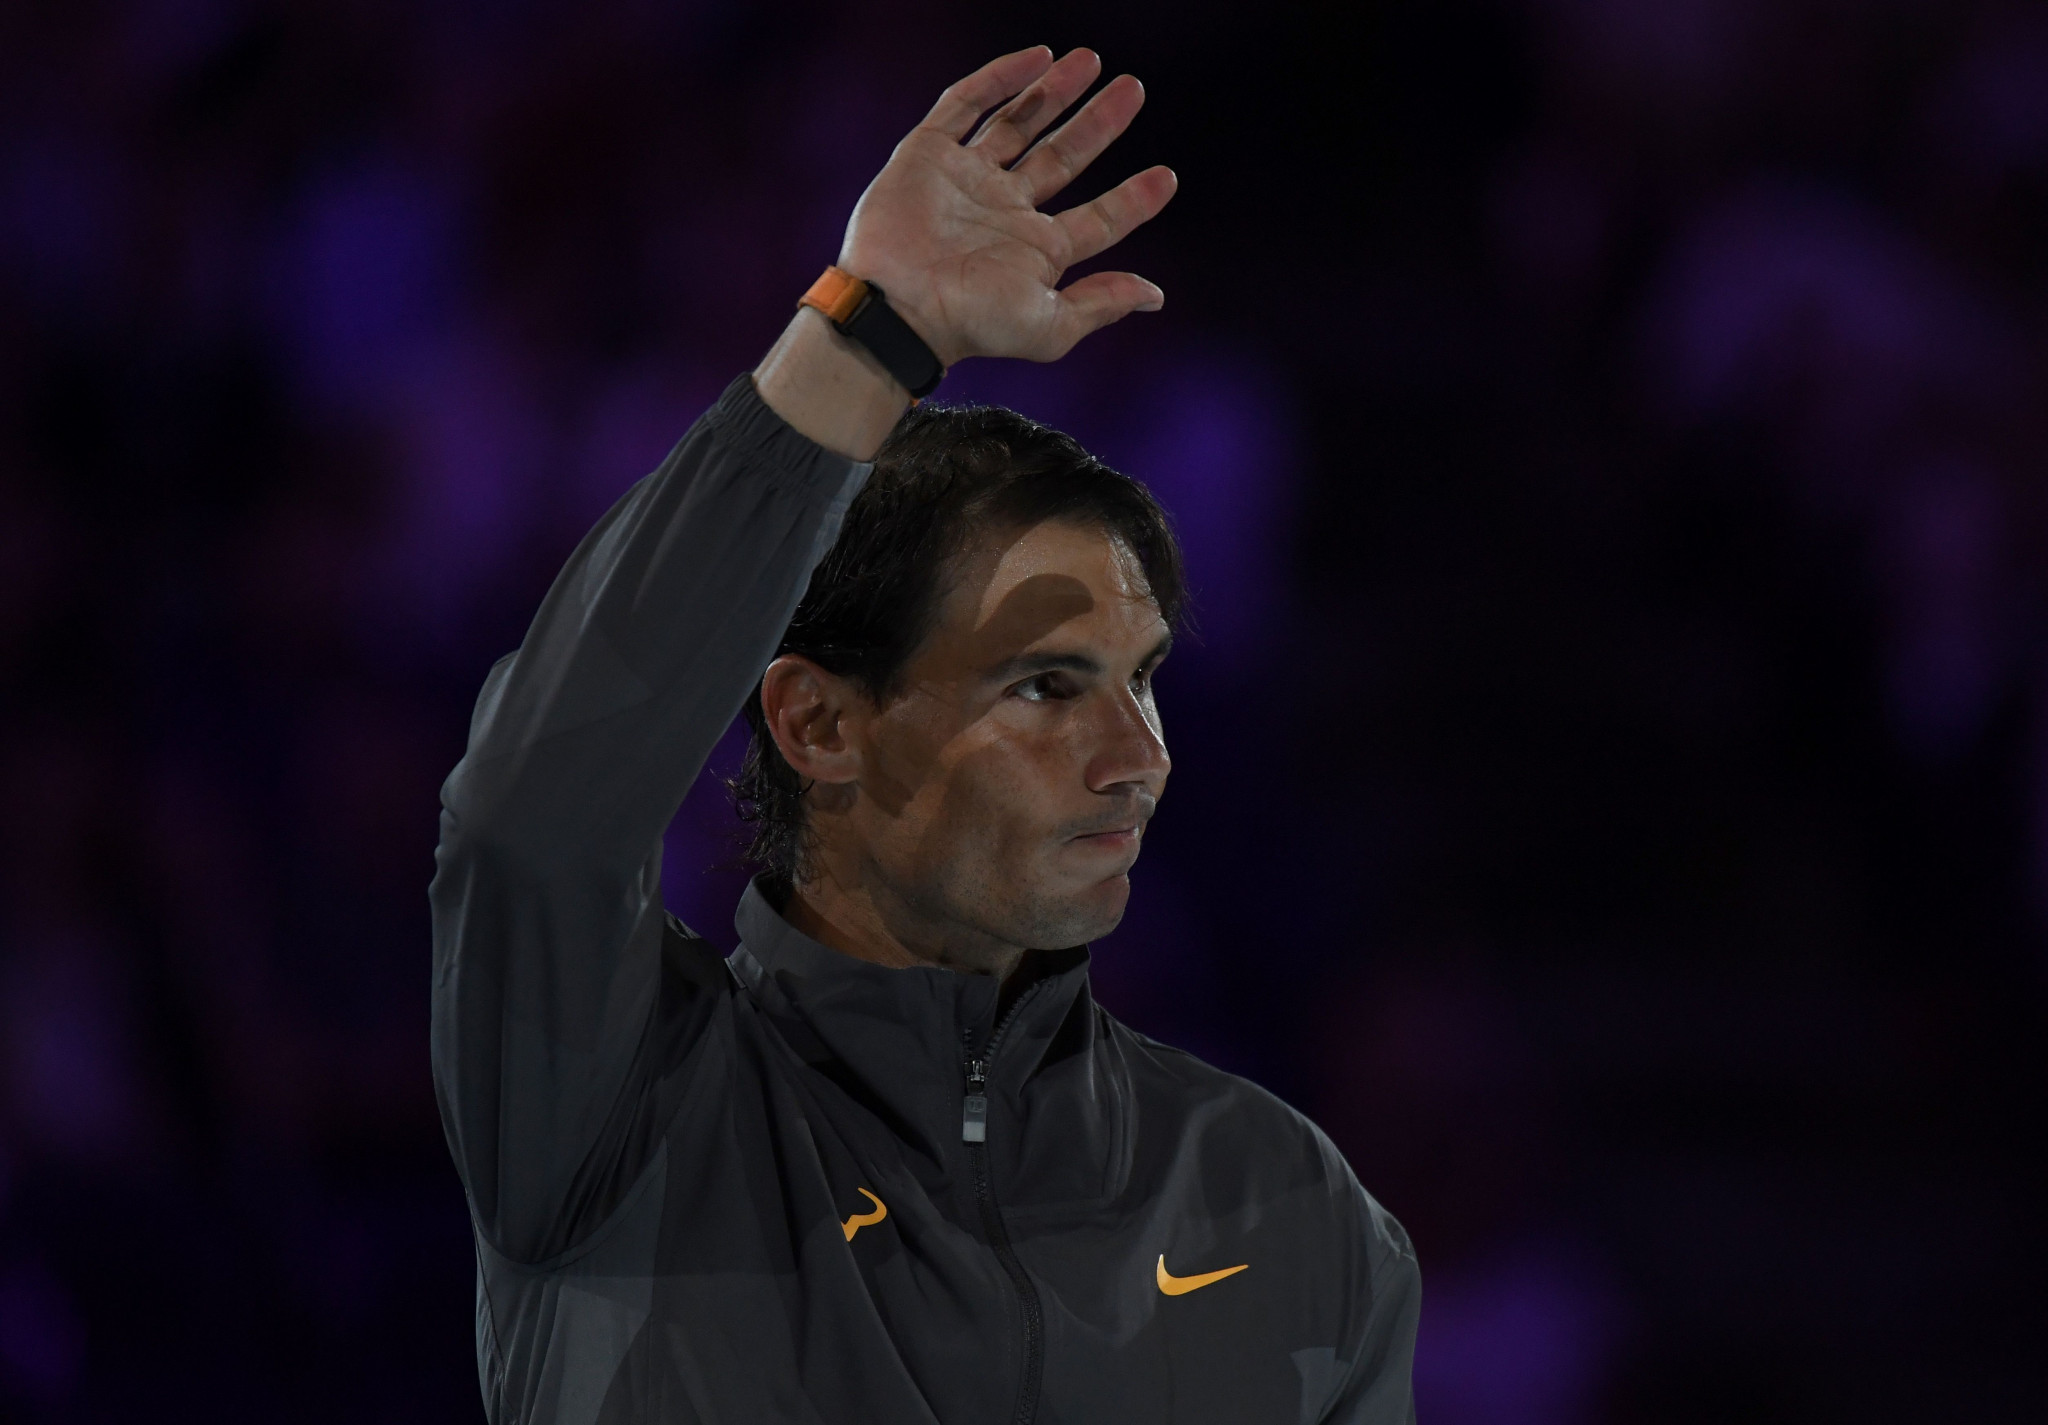 Rafael Nadal had no answer to Novak Djokovic in a one-sided final in Melbourne ©Getty Images